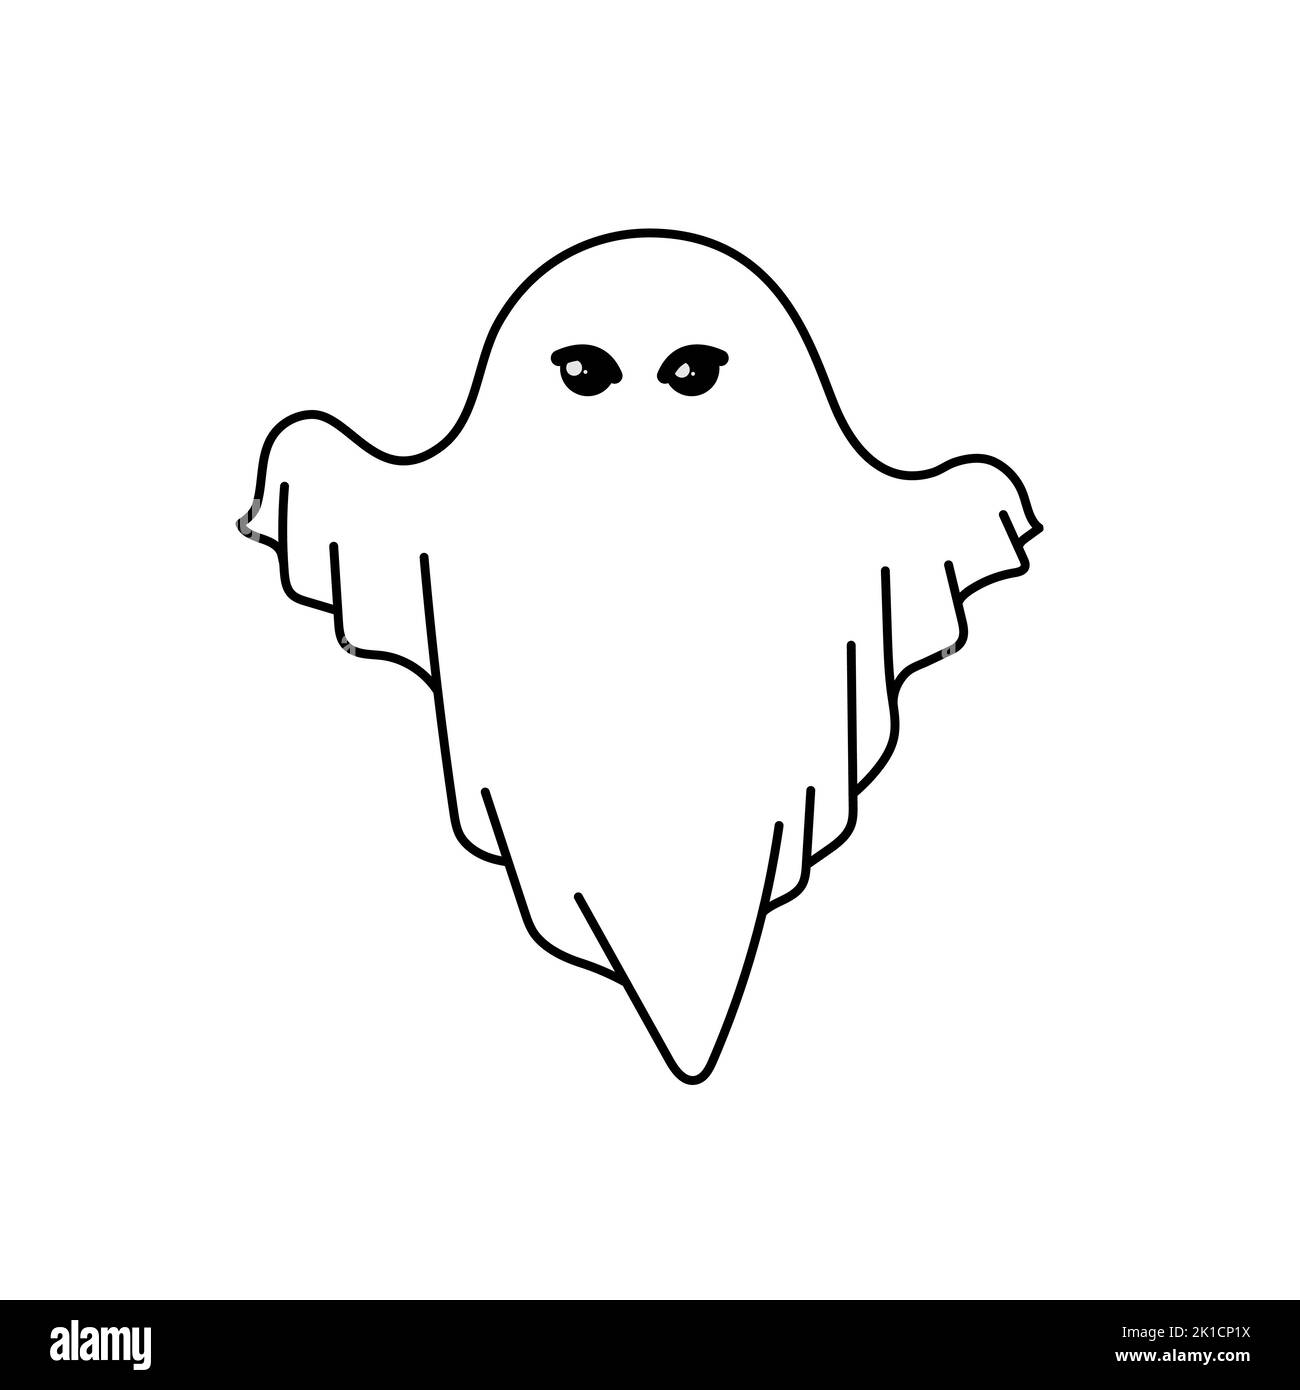 Ghost cartoon character. Cute outlines isolated flying ghost under white sheet. Halloween logo. Flat design icon for booklet, banner, website. Vector Stock Vector